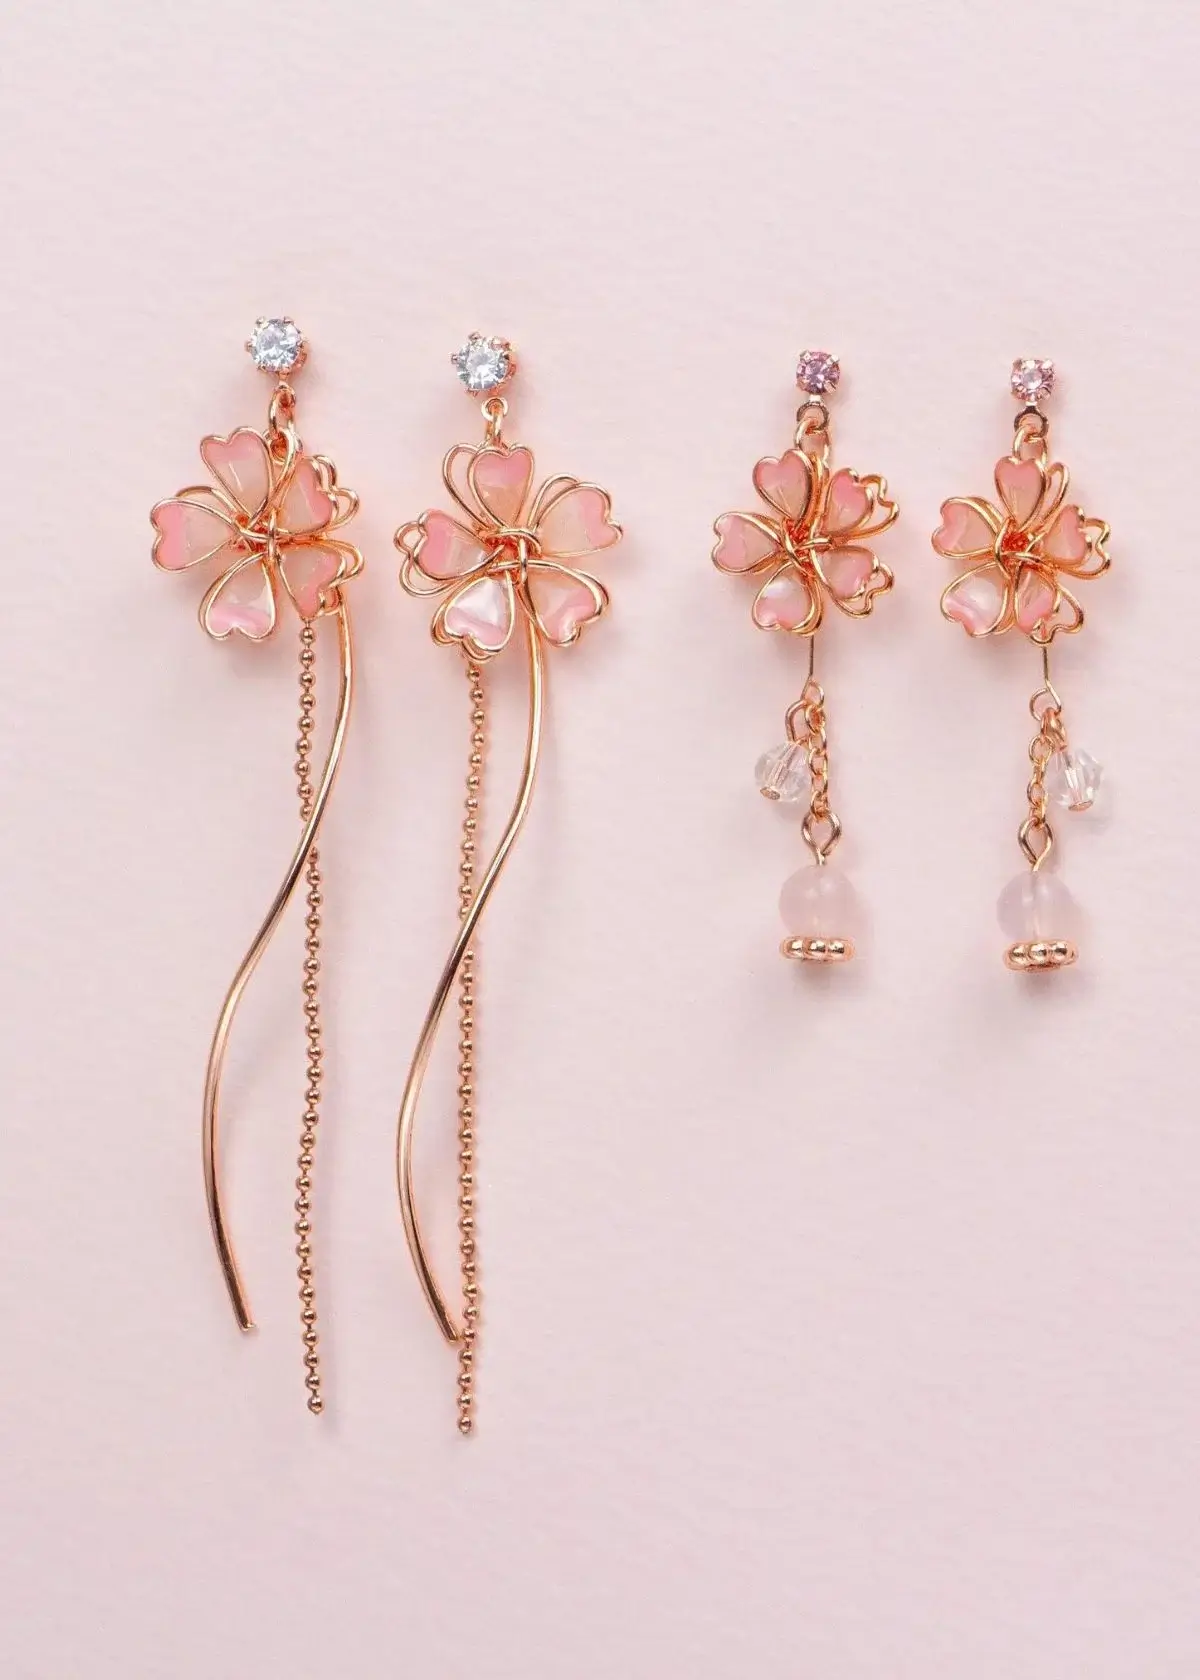 What are Cherry Blossom Earrings?